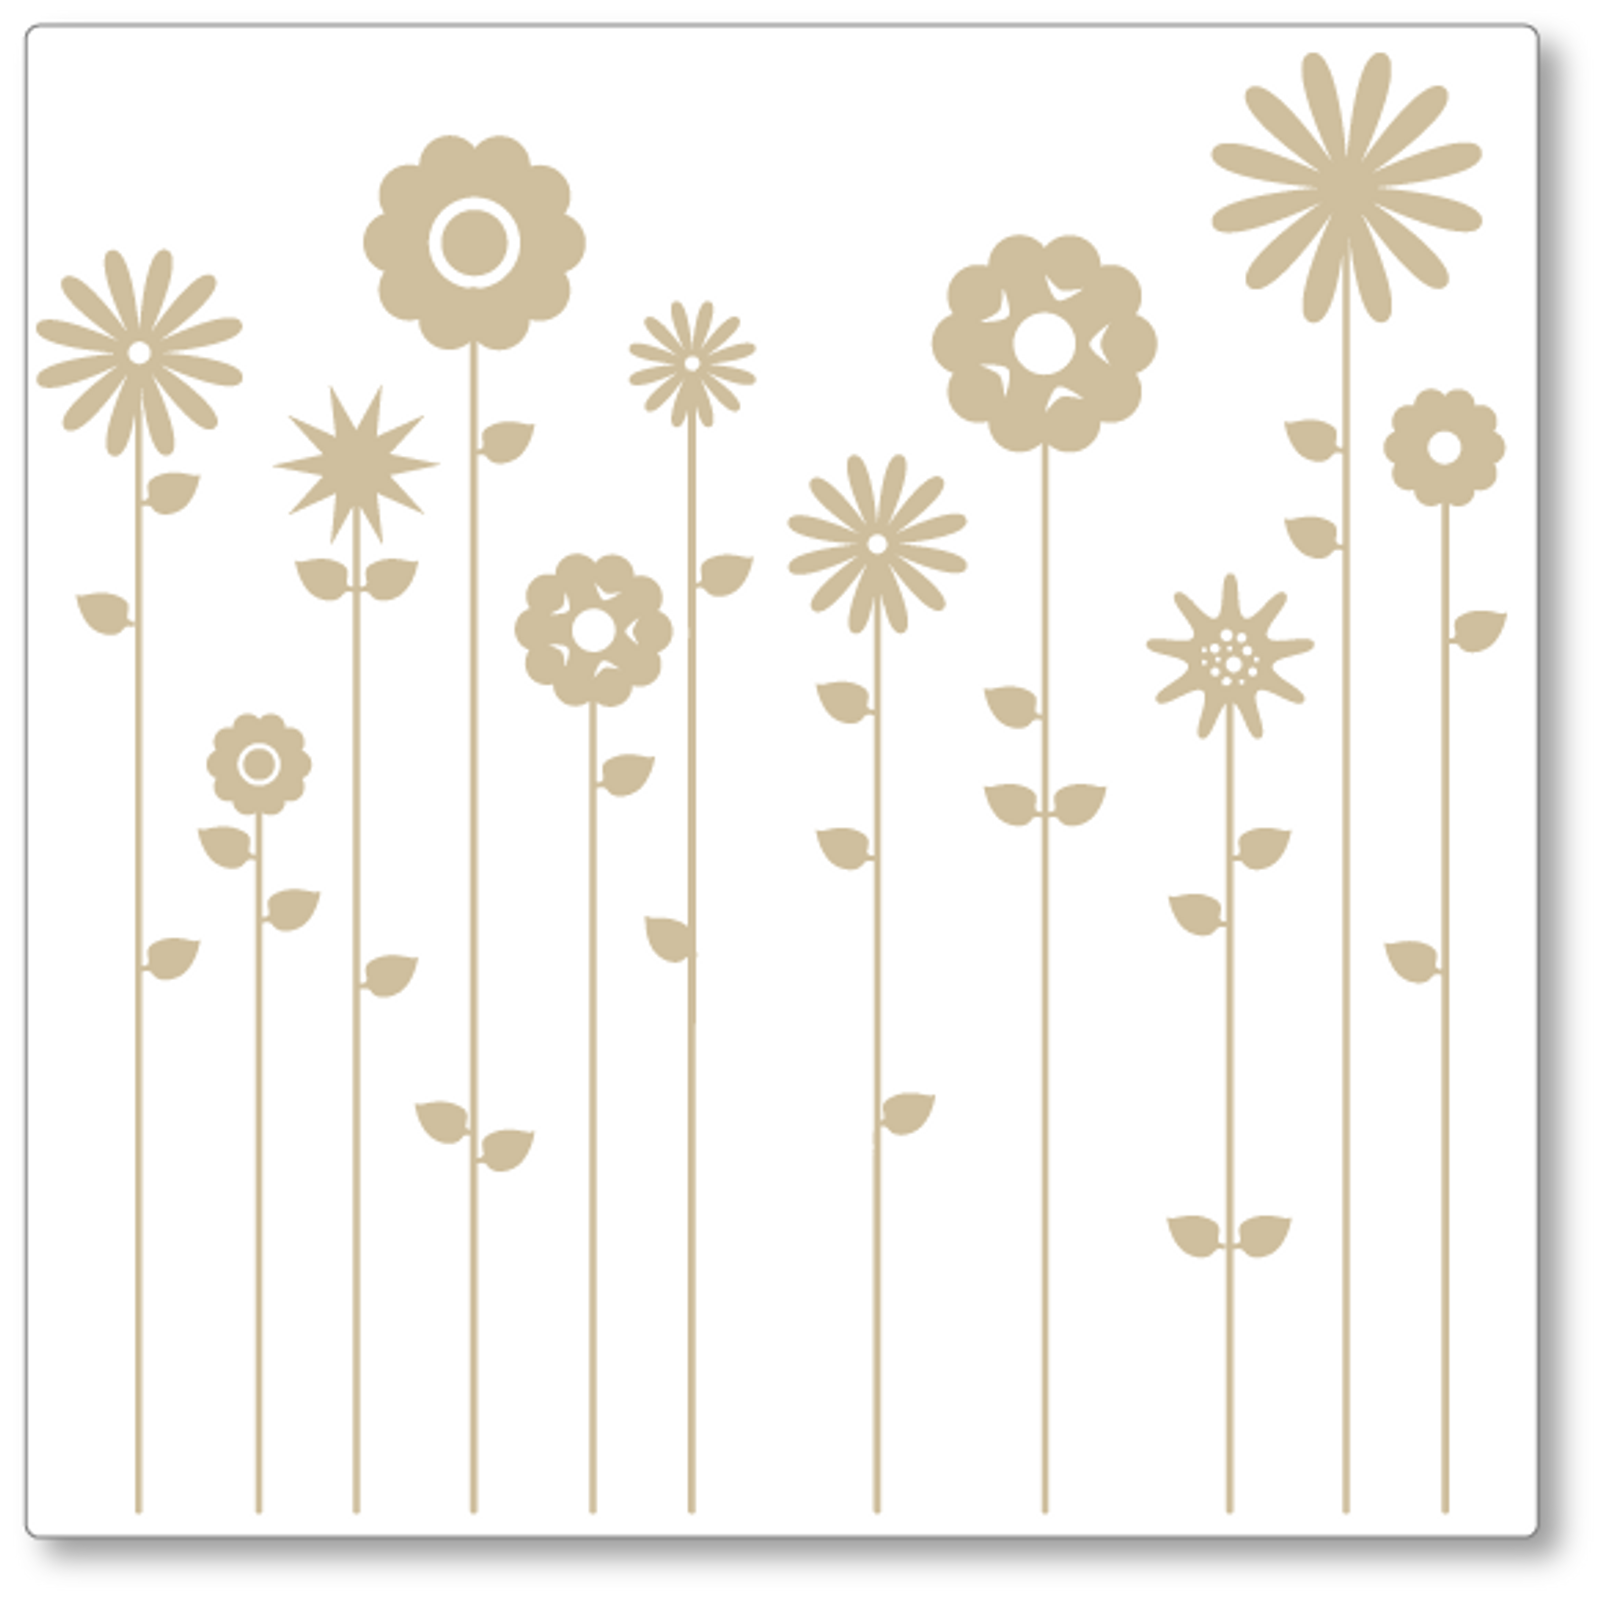 Our field of flowers vinyl wall decal features a variety of flowers on very tall stems with leaves. Shown here in beige on white.